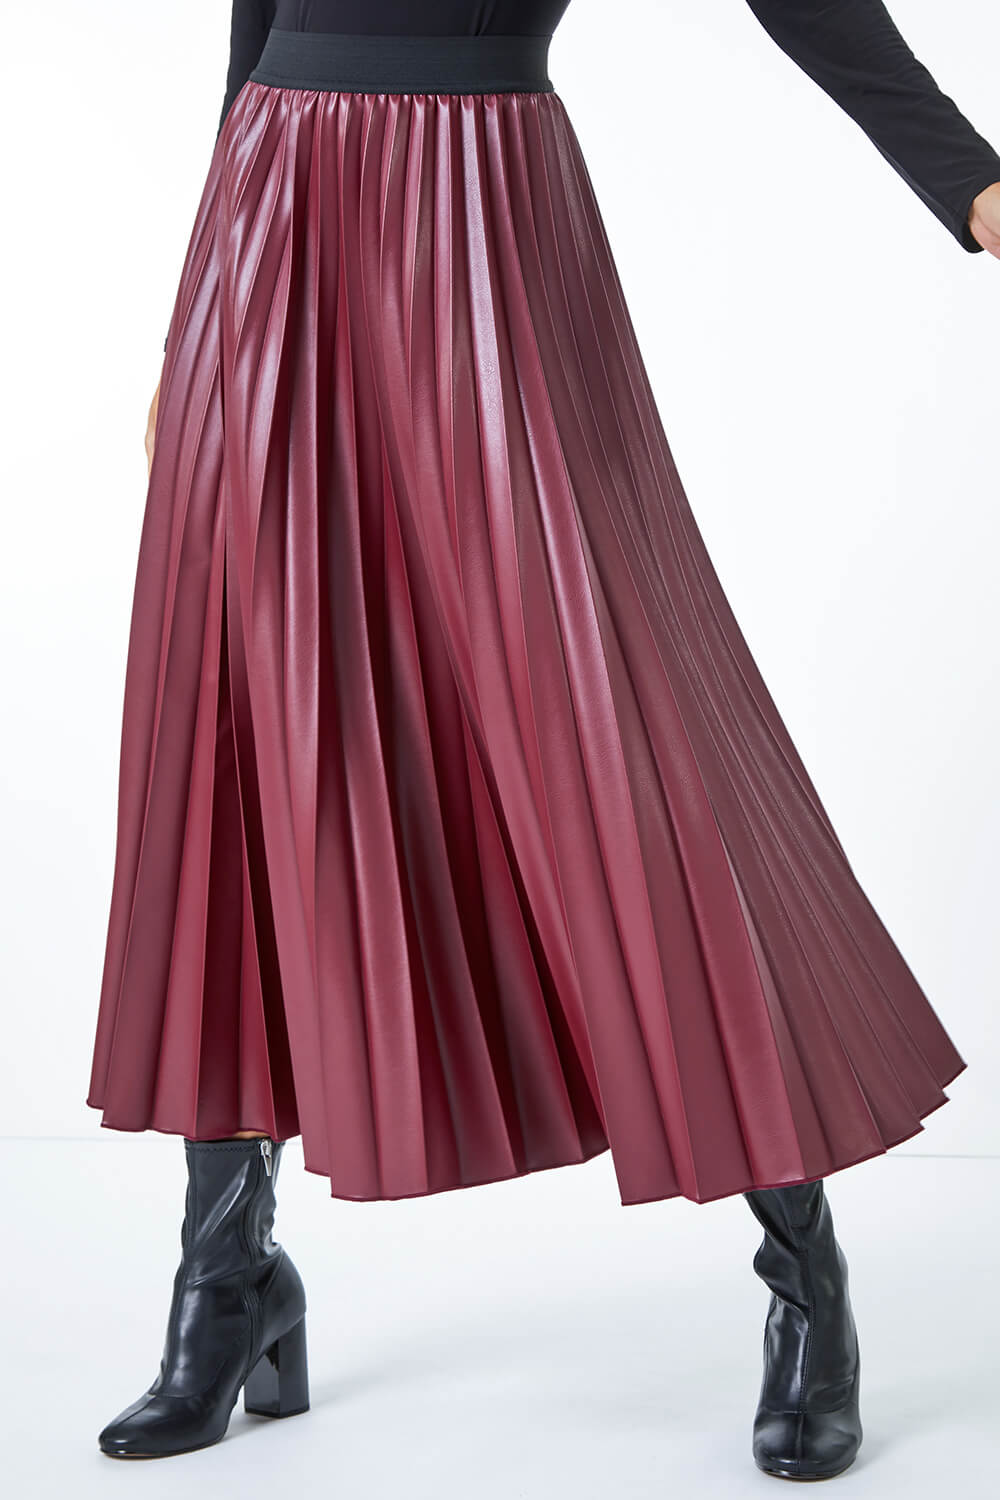 Red Faux Leather Pleated Maxi Skirt, Image 5 of 5